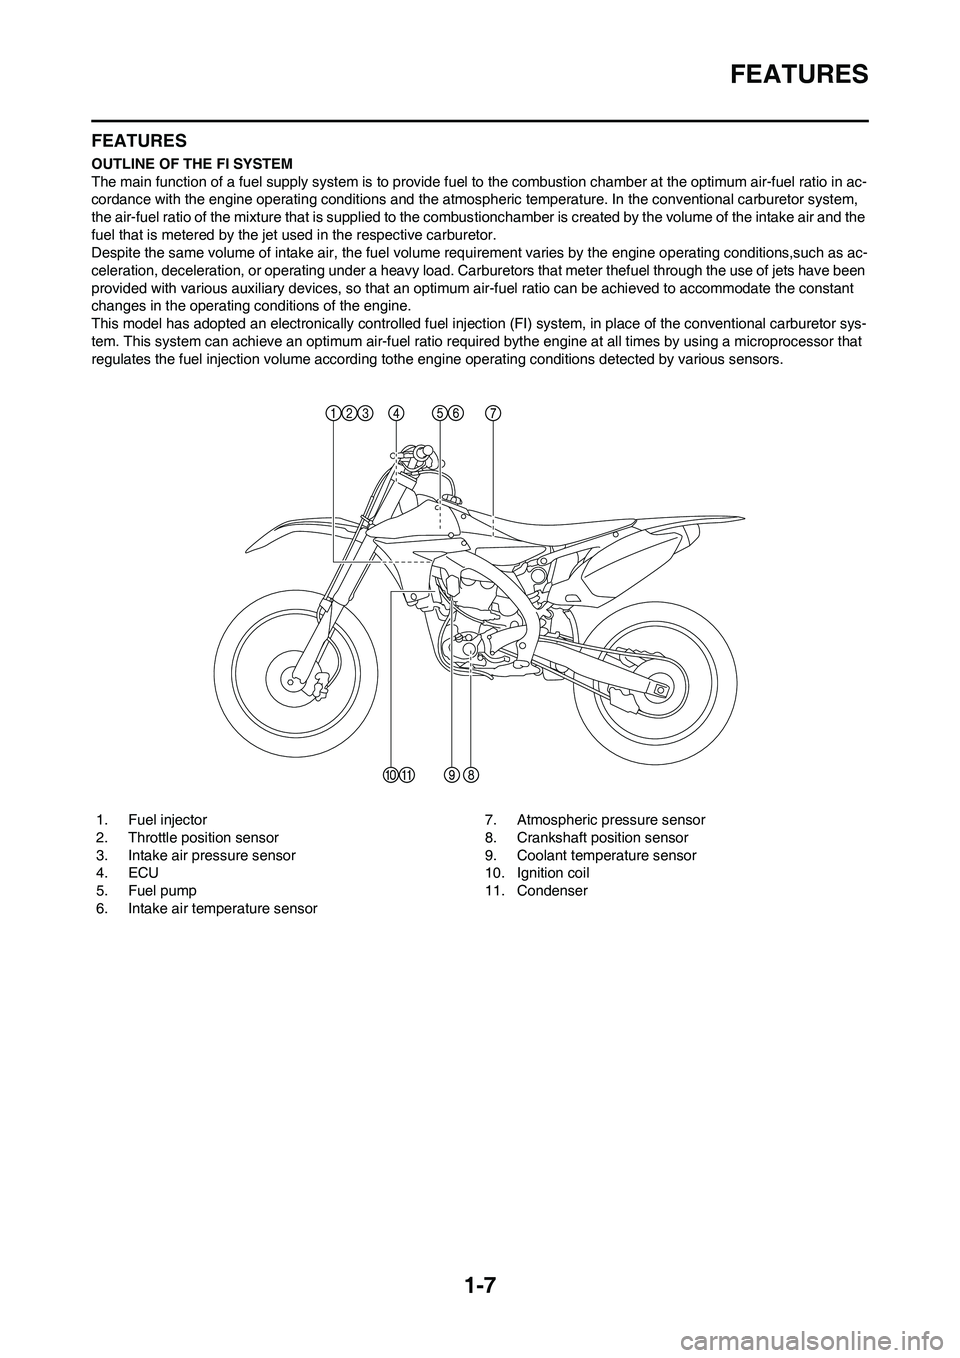 YAMAHA YZ450F 2010  Owners Manual 1-7
FEATURES
FEATURES
OUTLINE OF THE FI SYSTEM
The main function of a fuel supply system is to provide fuel to the combustion chamber at the optimum air-fuel ratio in ac-
cordance with the engine oper